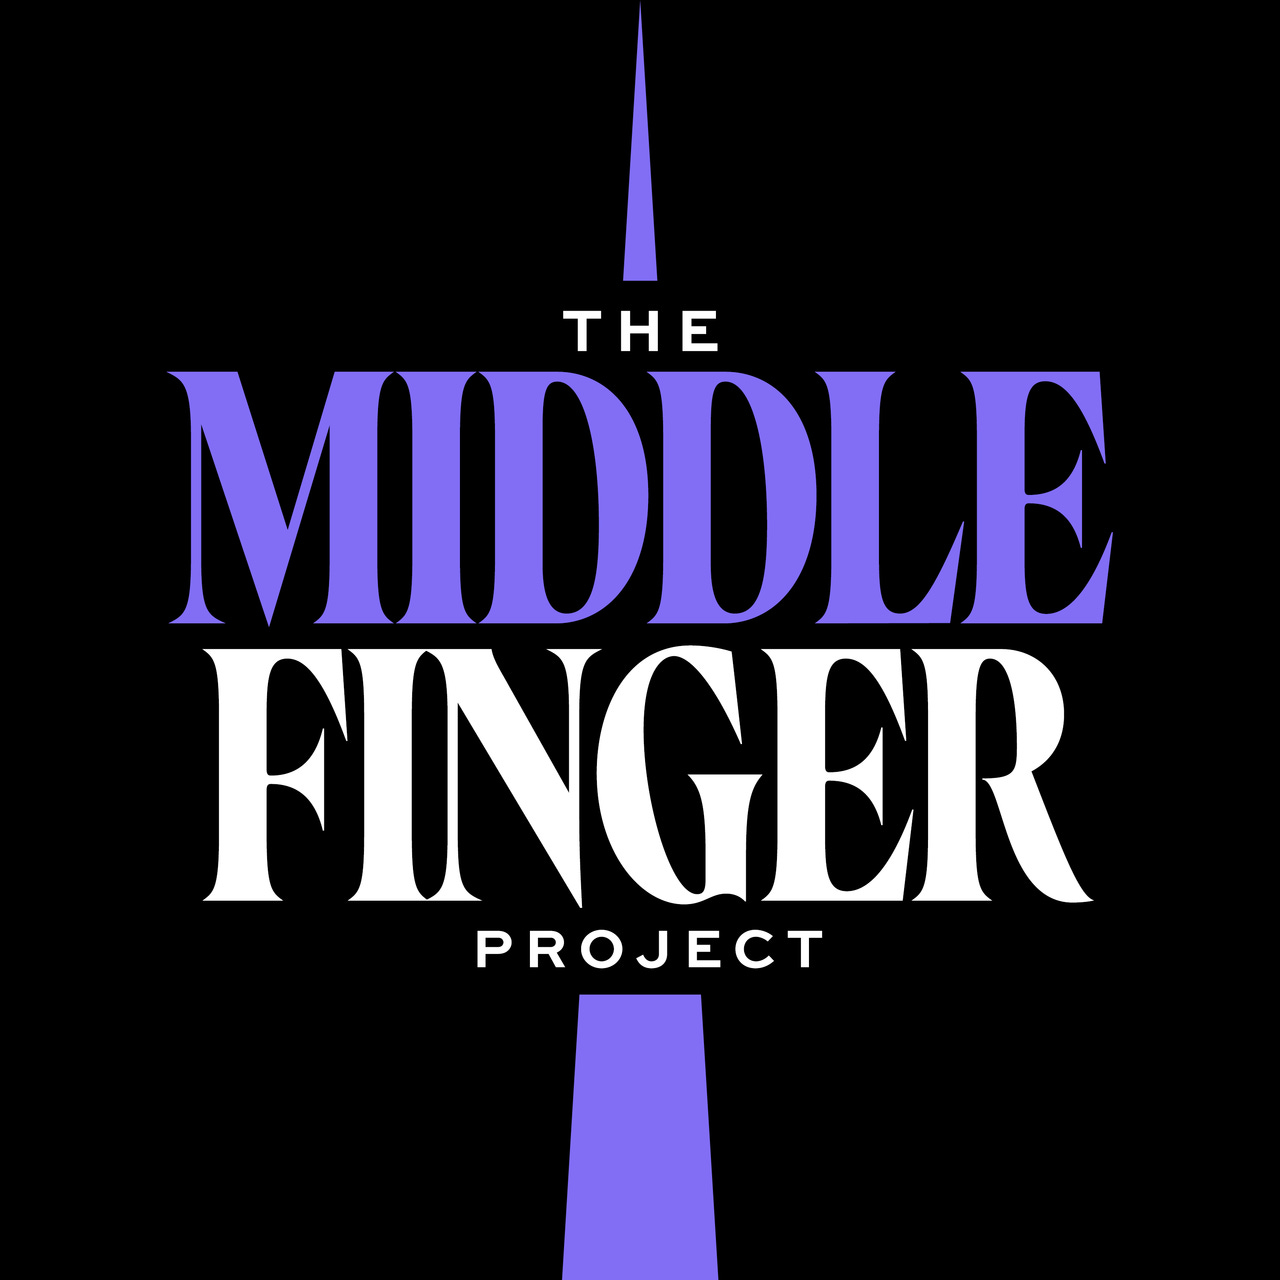 Artwork for The Middle Finger Project